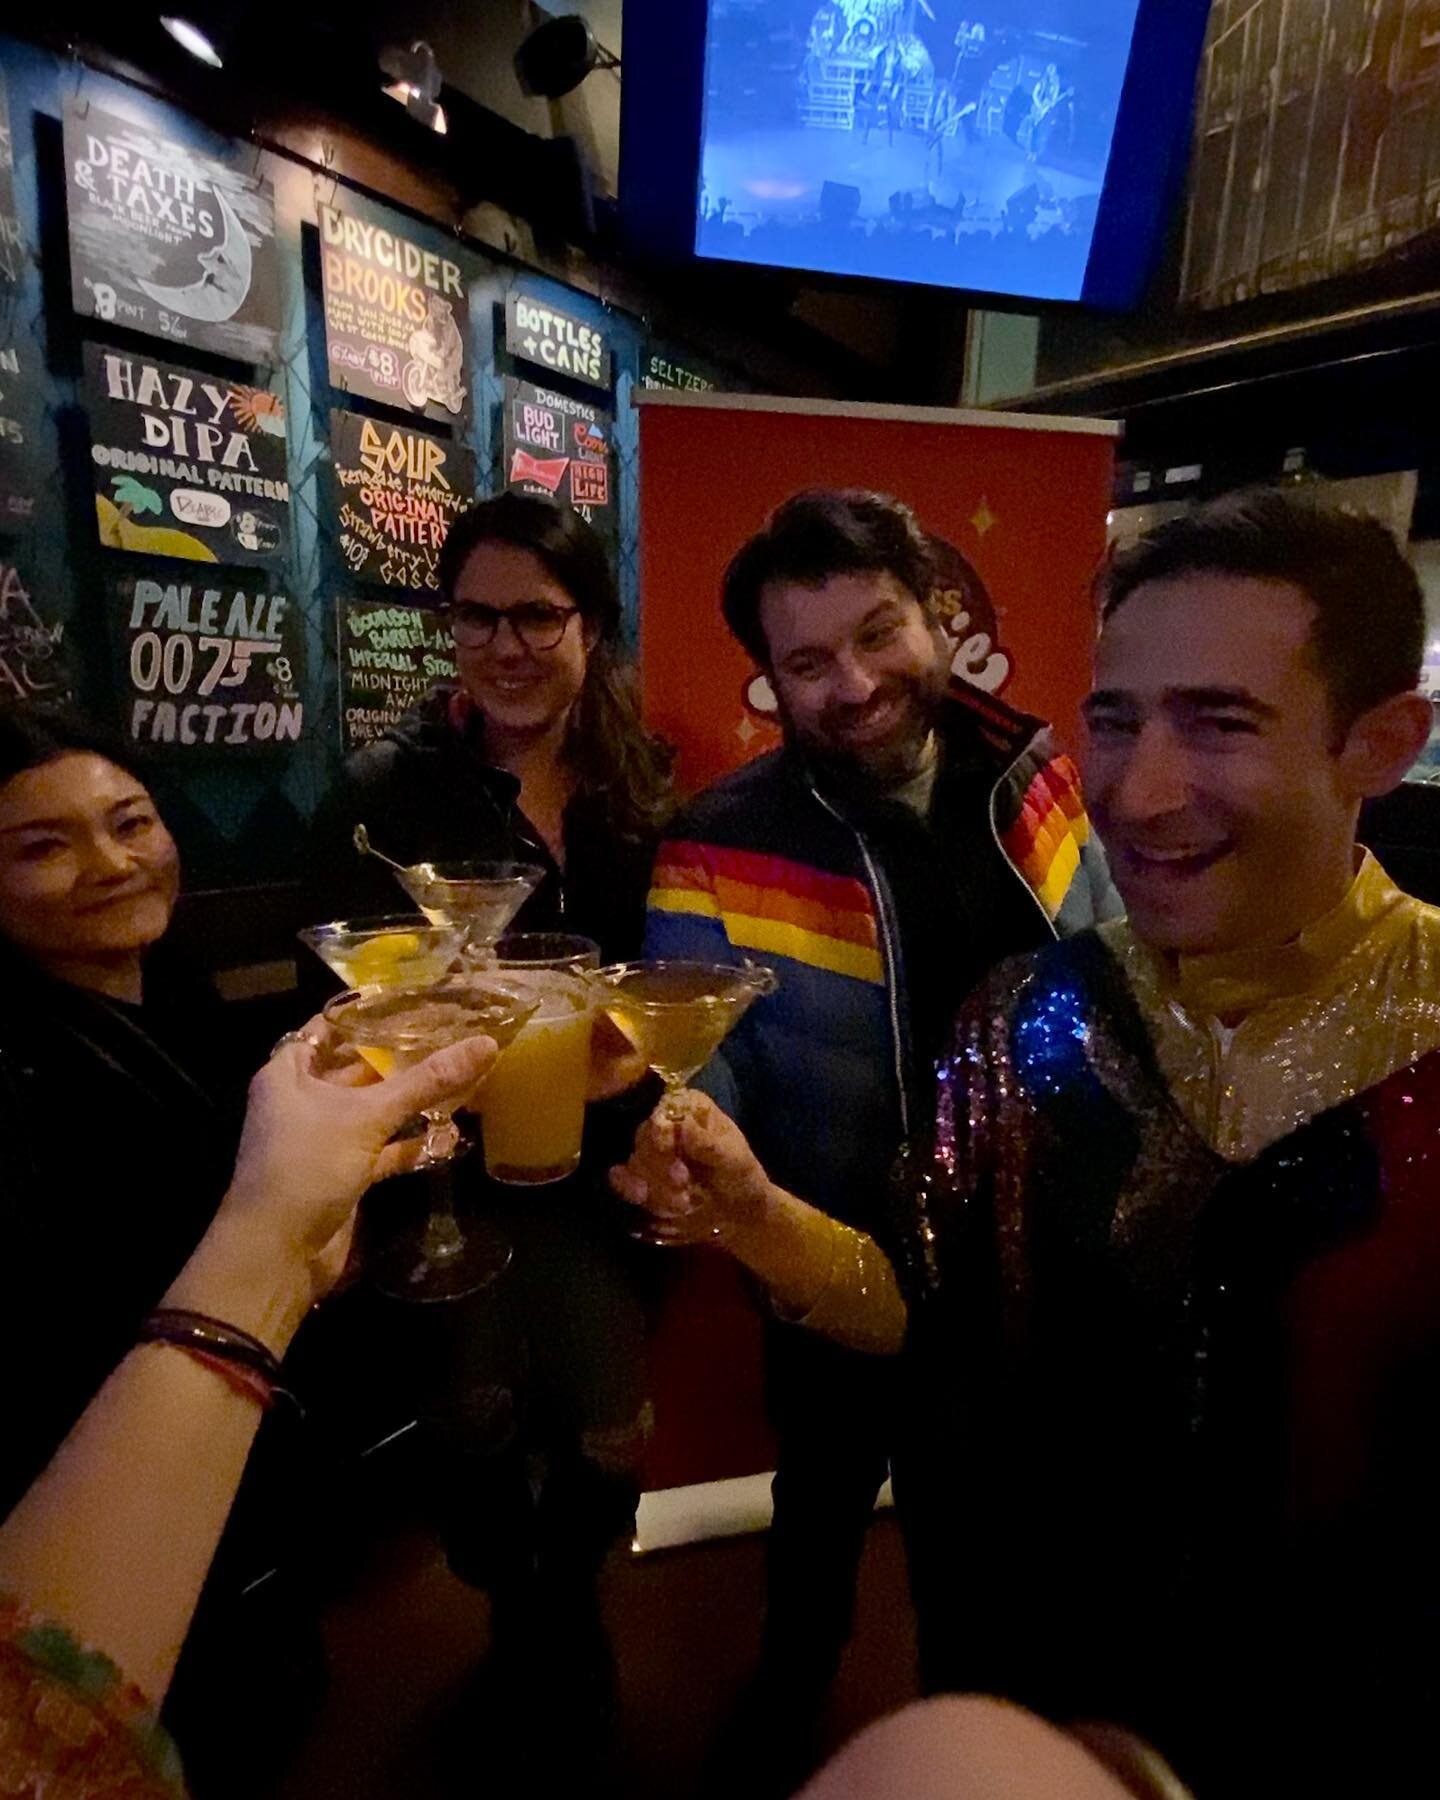 And finally, we ended our Clement Street boogie at the fabulous @540rogues, with dirty martinis and raffle prizes galore. Thank you to everyone who came out in February!! We&rsquo;re taking March off but will see you for the next Boogie soon ❤️ #smal